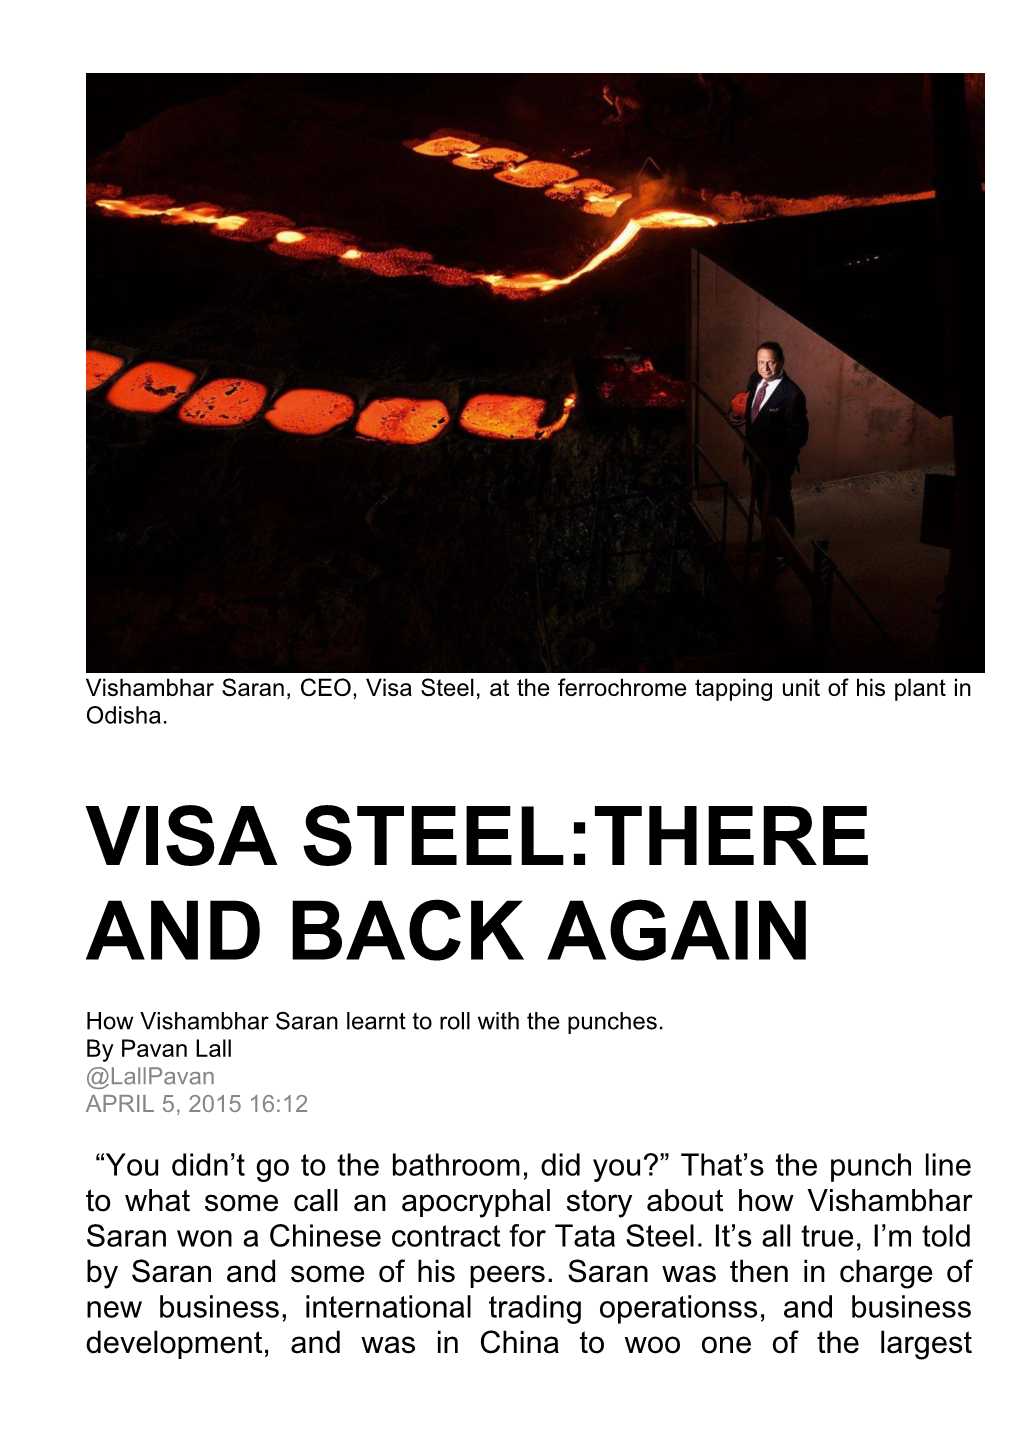 Visa Steel:There and Back Again